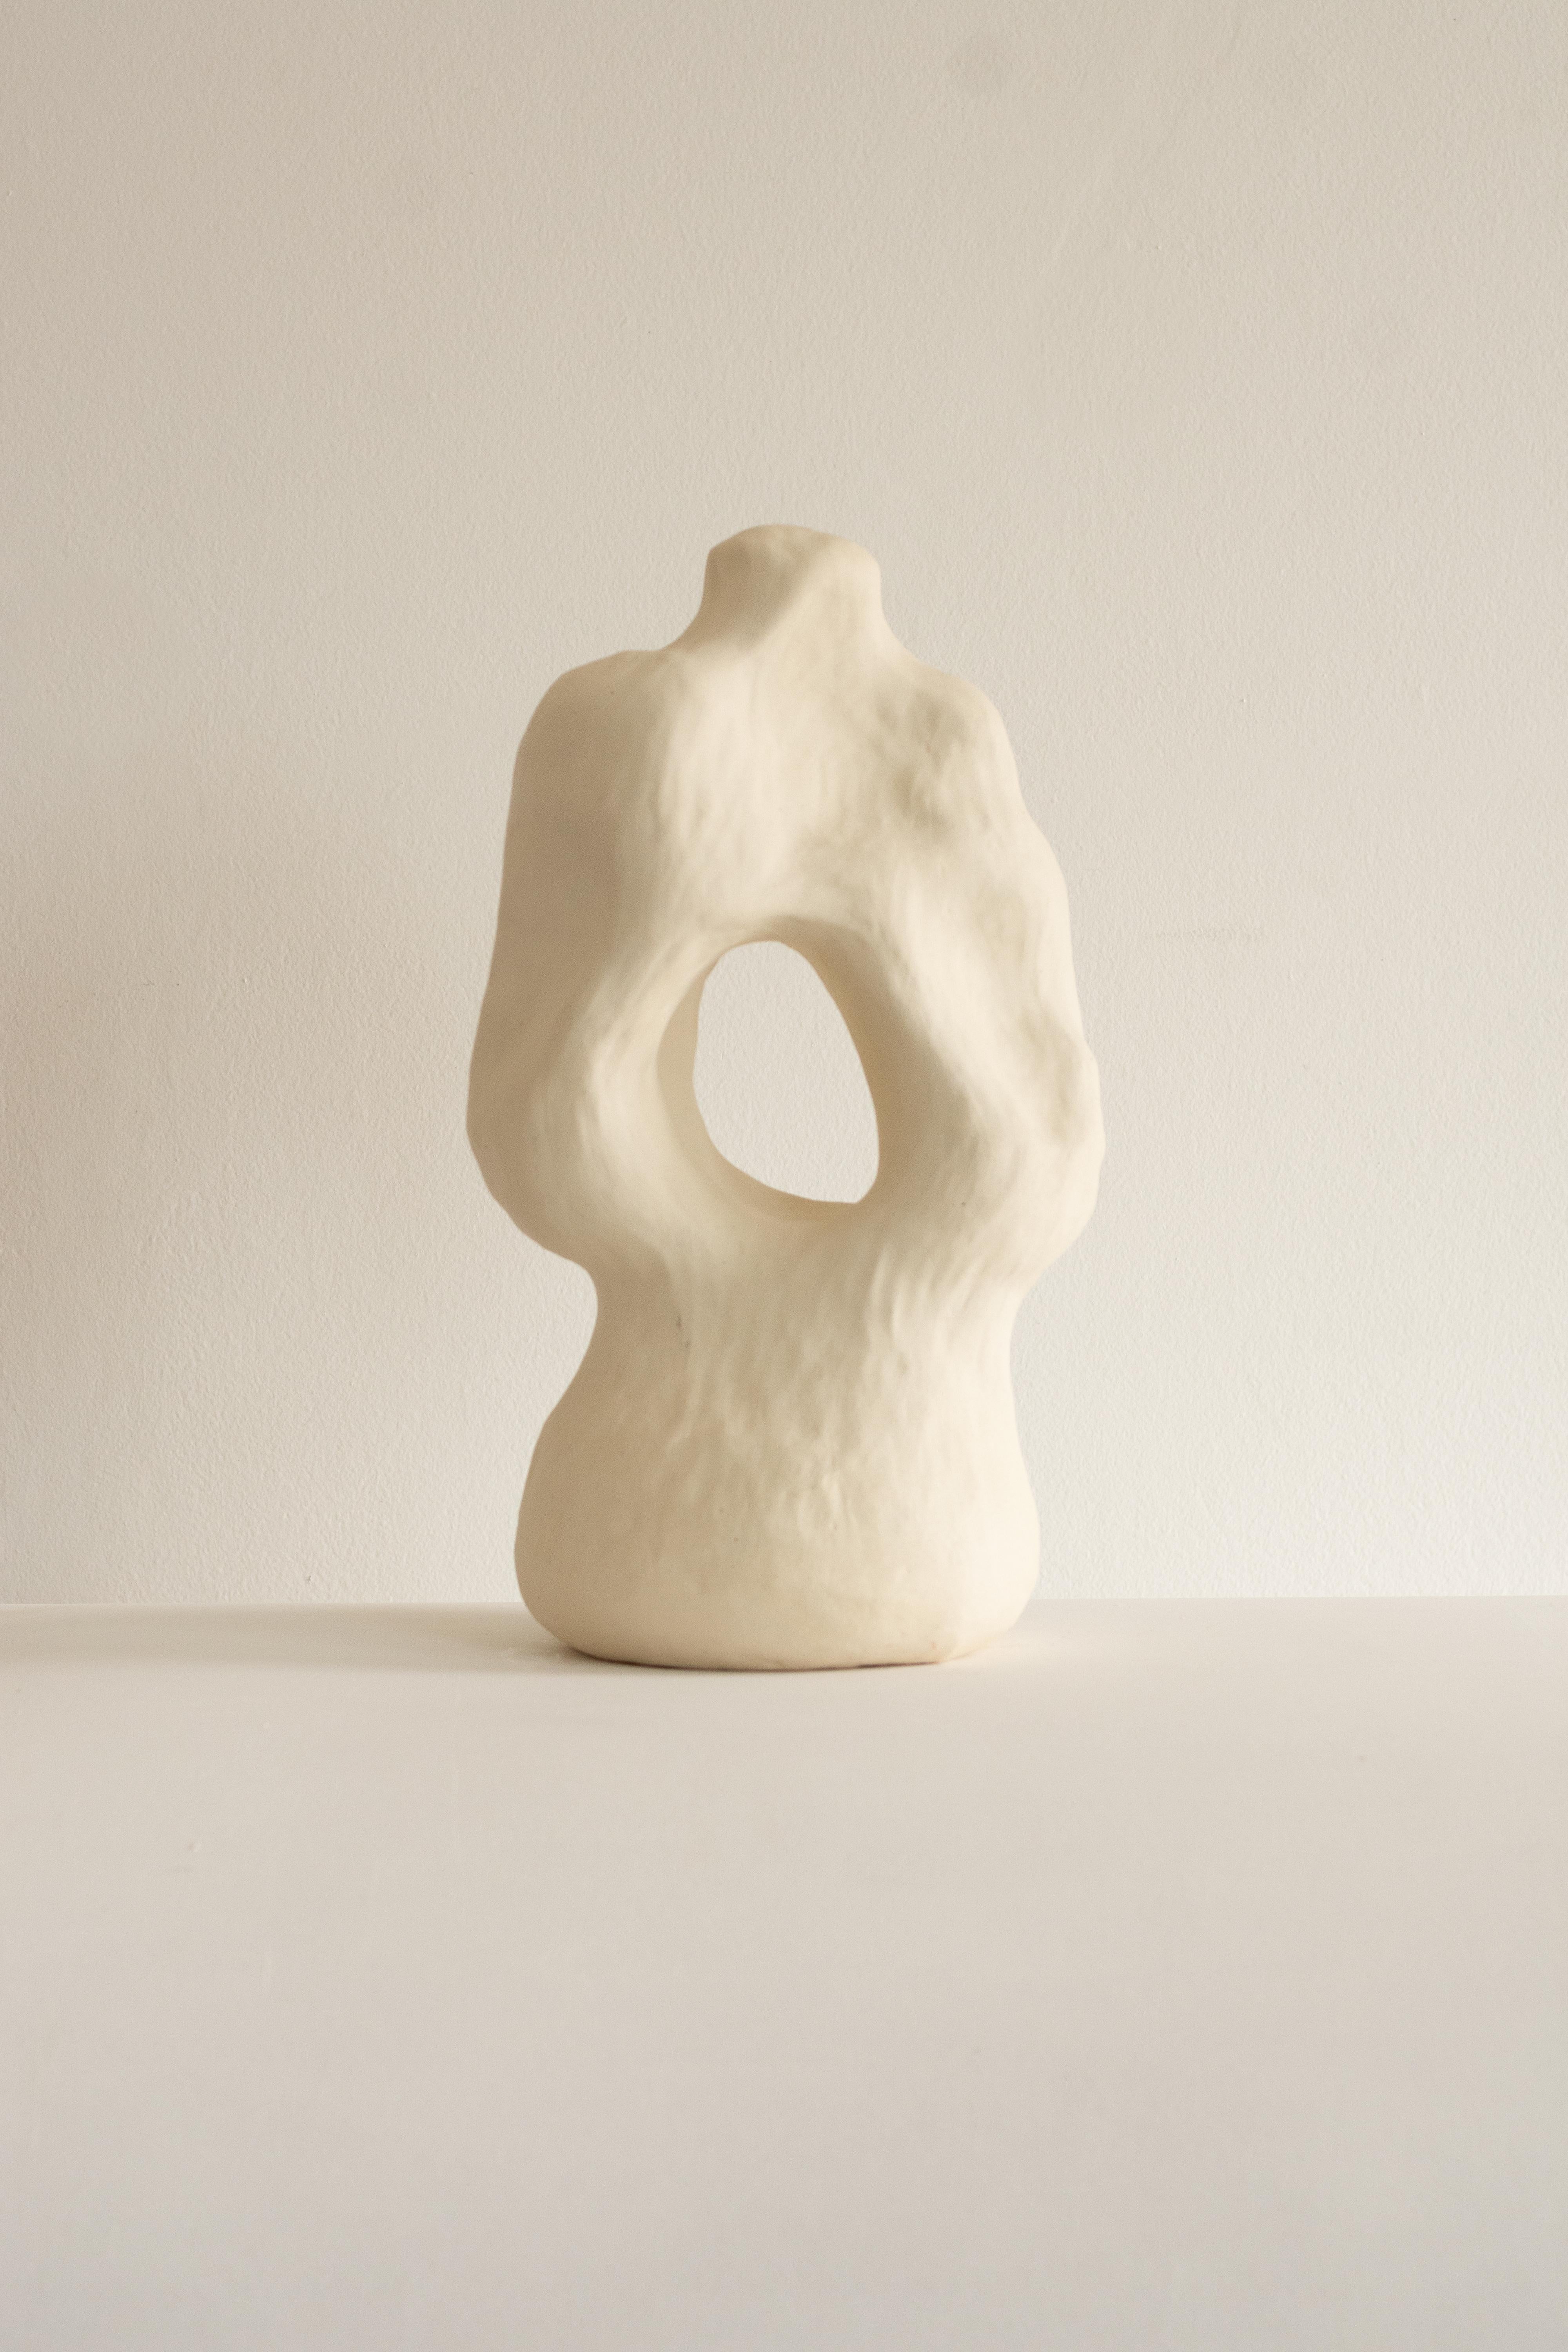 This sculpture is part of the Rupa series, a collection of handcrafted pieces crafted without molds that absorb the contours and textures of the craftsman's hand, transforming it into an object with a clean and complex shape.

The sculpture N.6